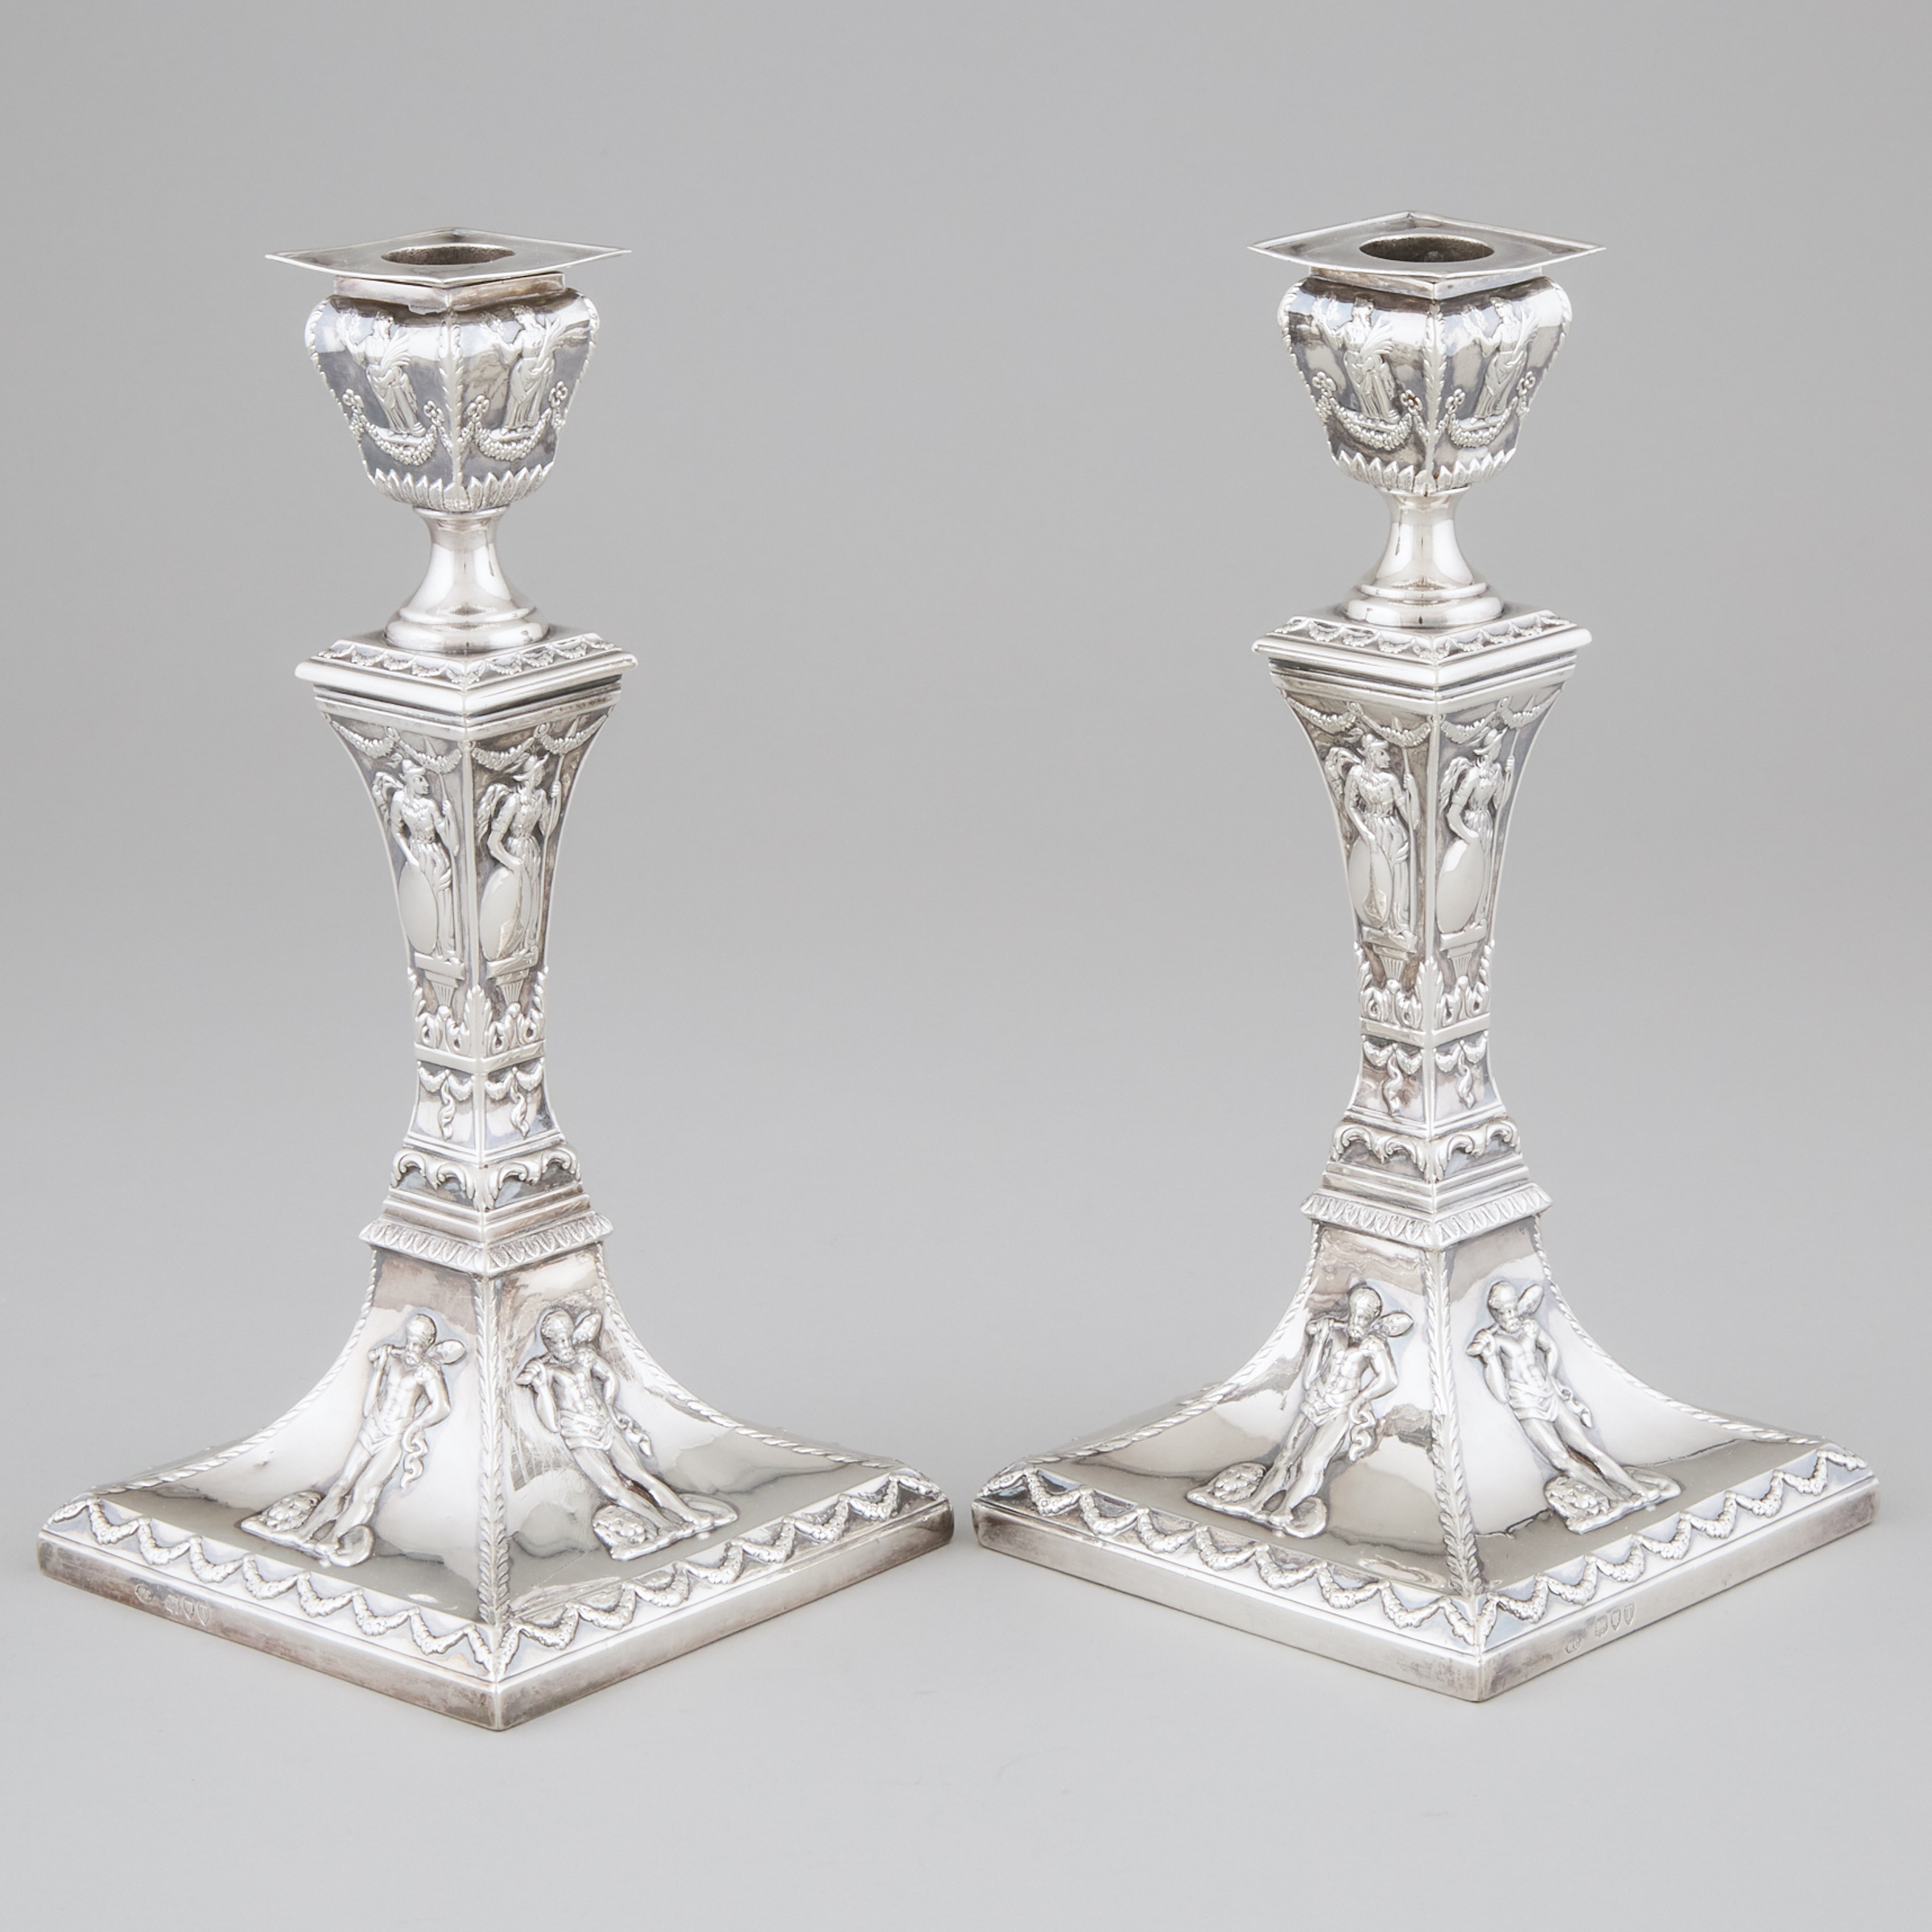 Pair of Victorian Silver Table Candlesticks, William Comyns, London, 1894